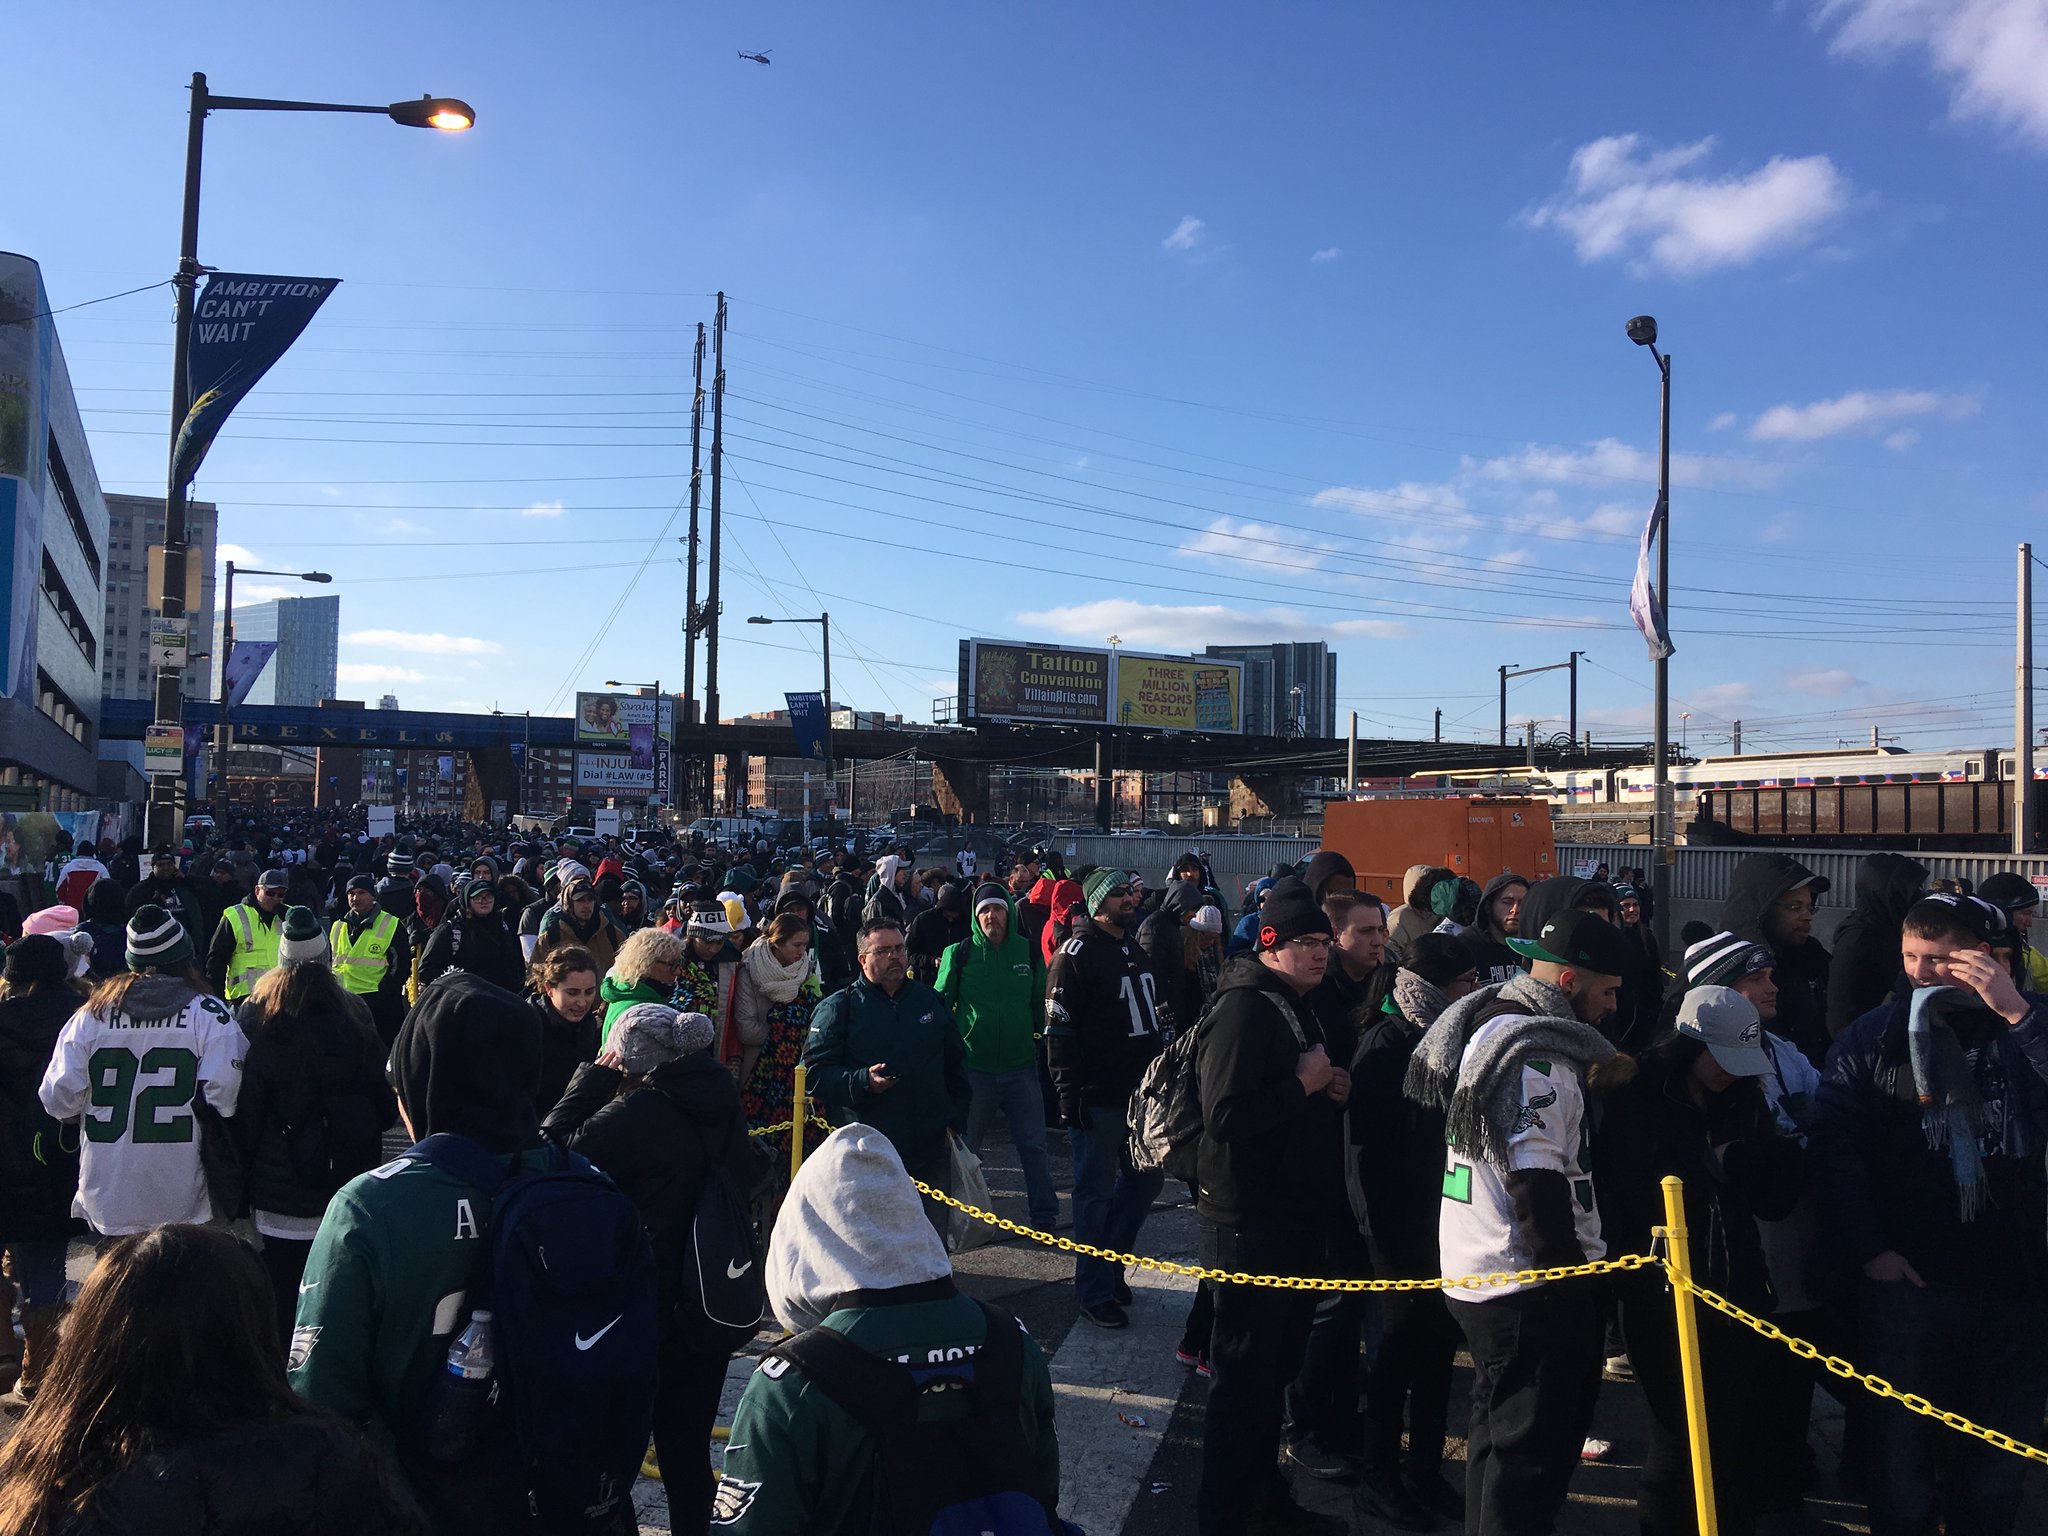 Eagles paradegoers wait in line to get into 30th Street Station. Credit: Jim Saksa/WHYY